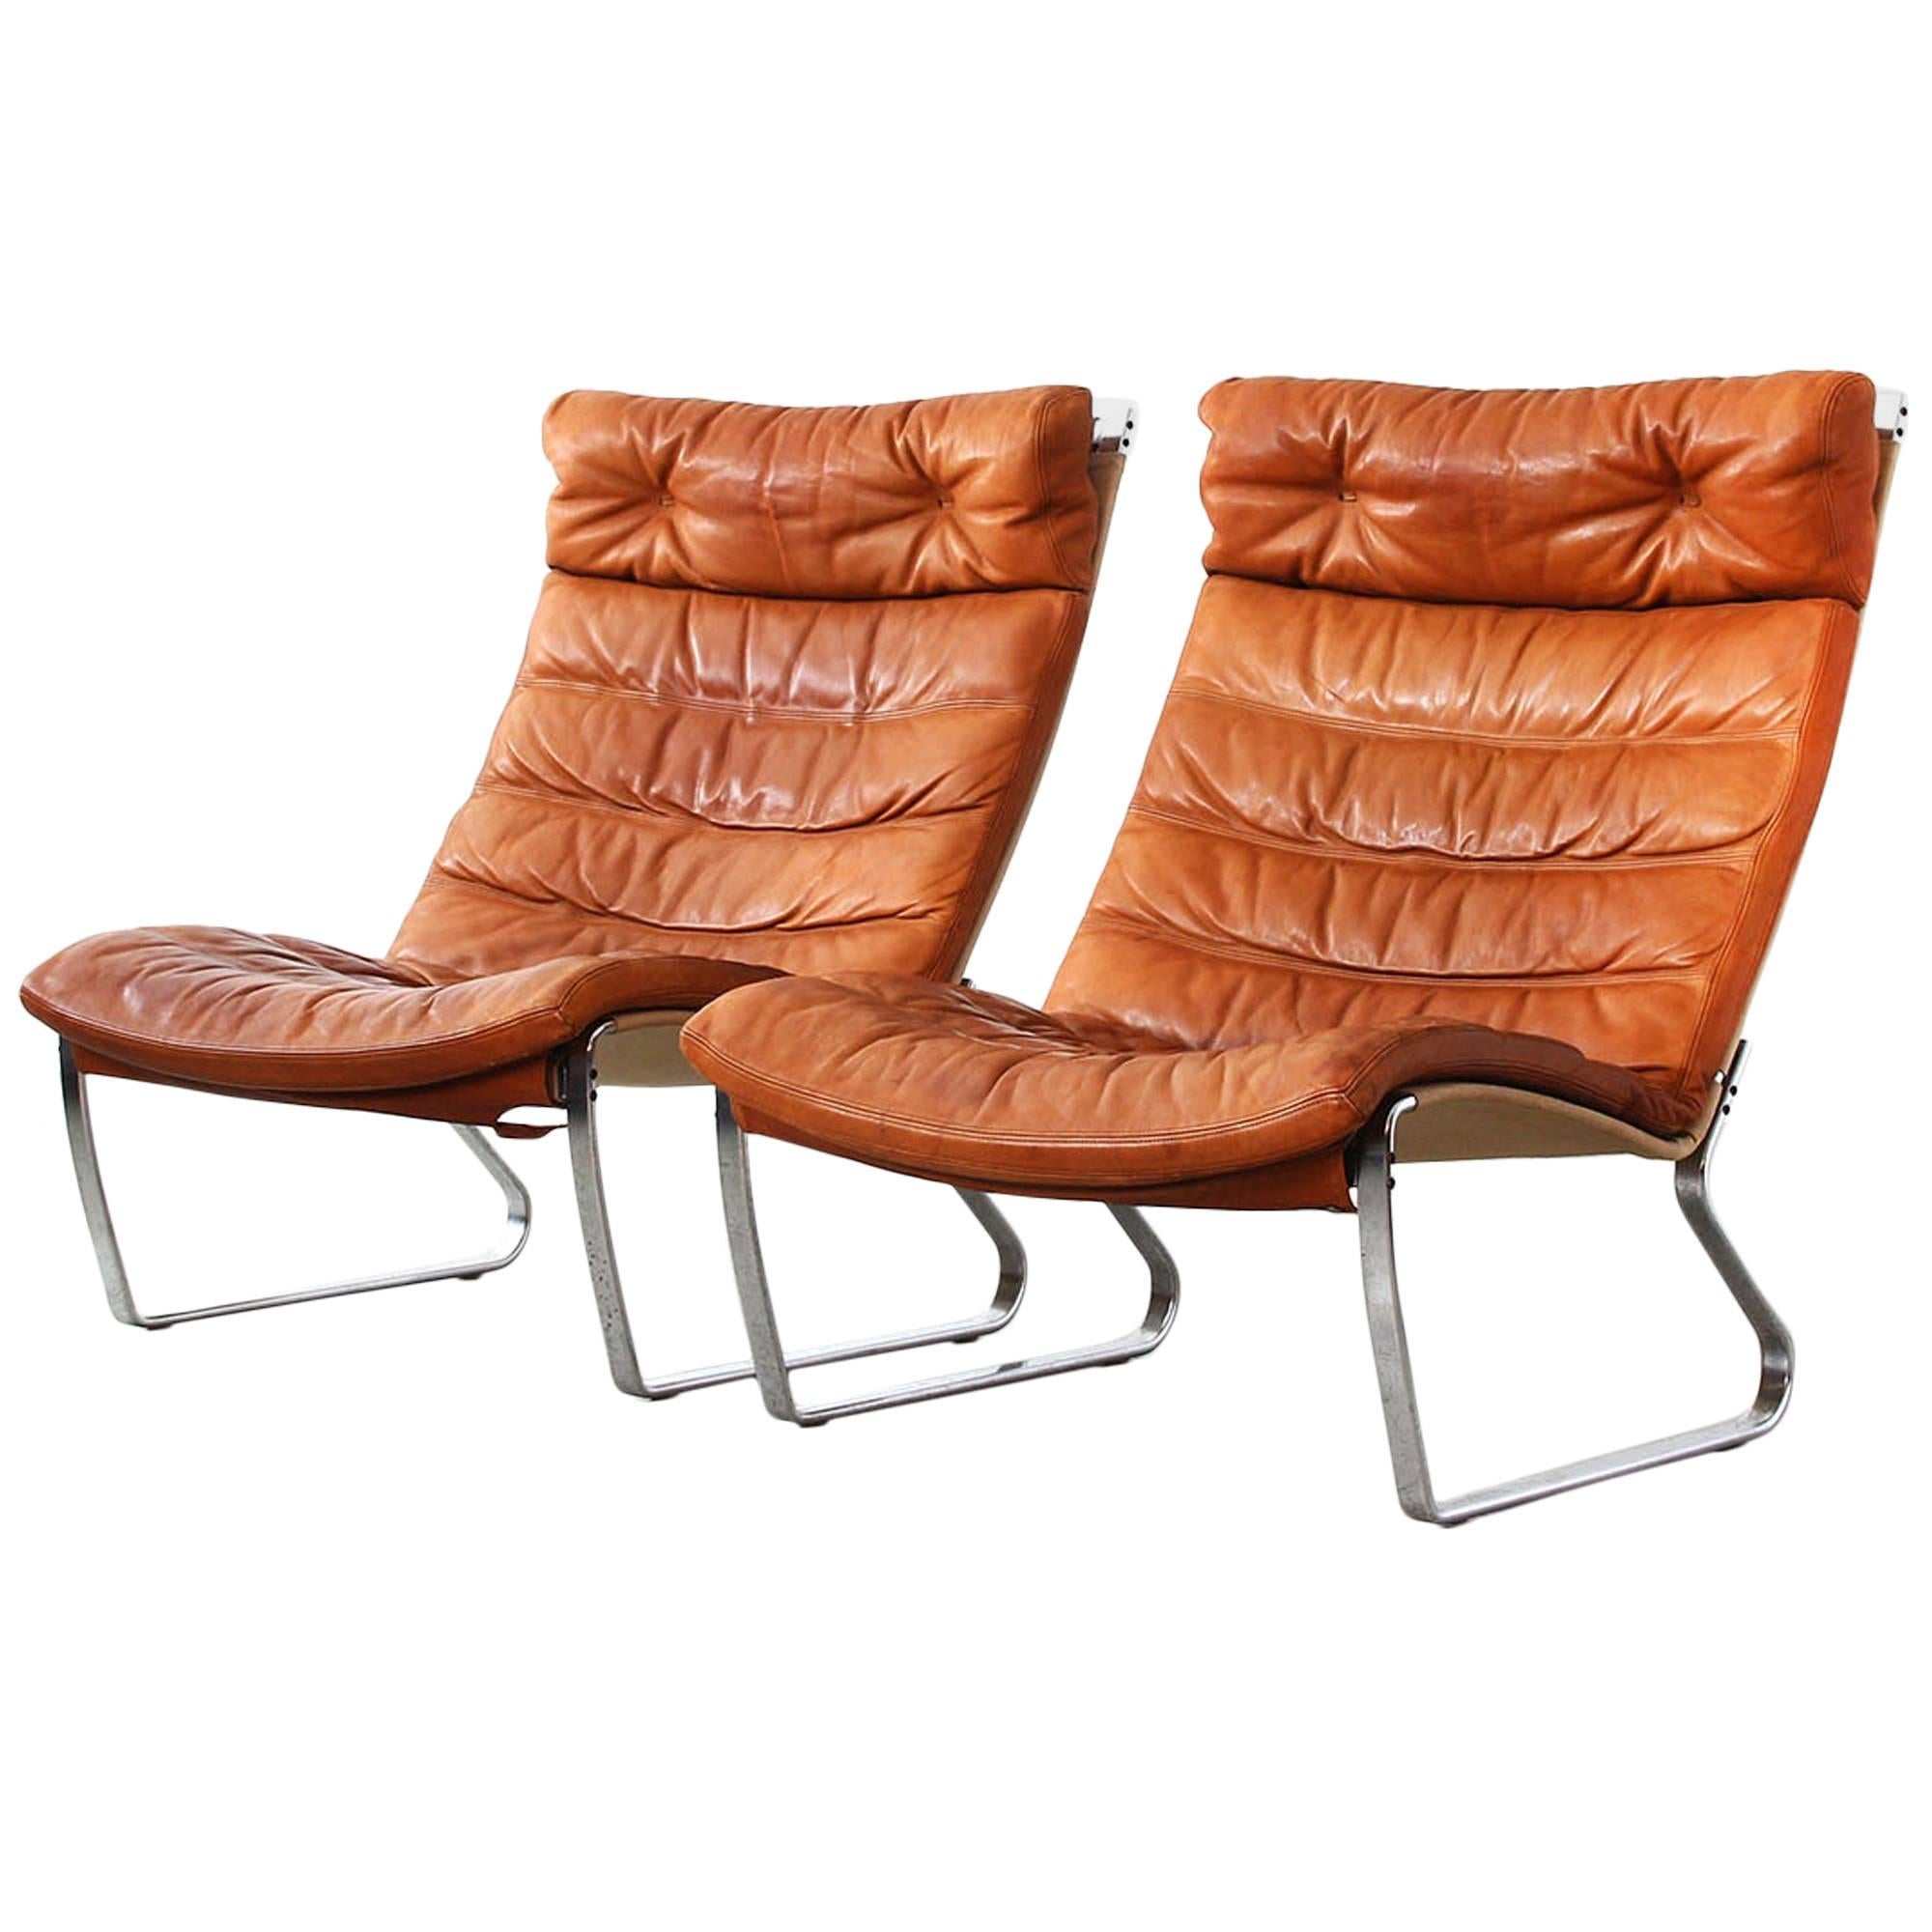 Lounge Chairs by Jørgen Kastholm for Kill International